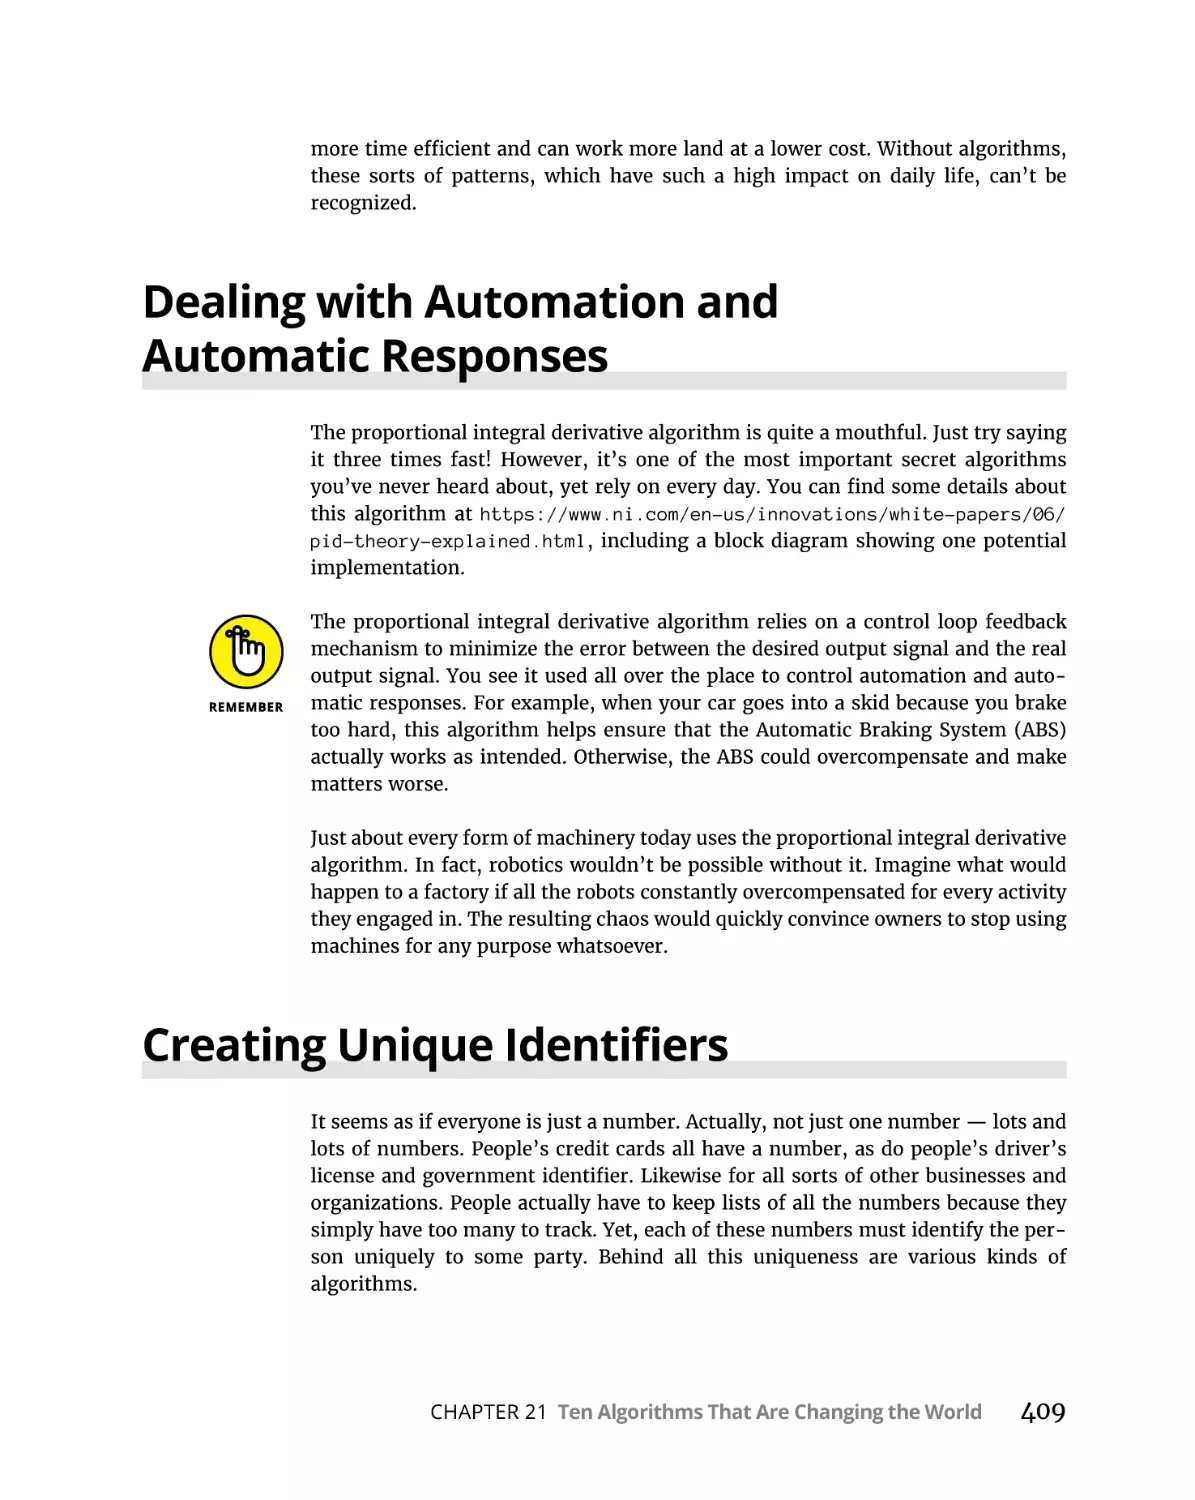 Dealing with Automation and Automatic Responses
Creating Unique Identifiers